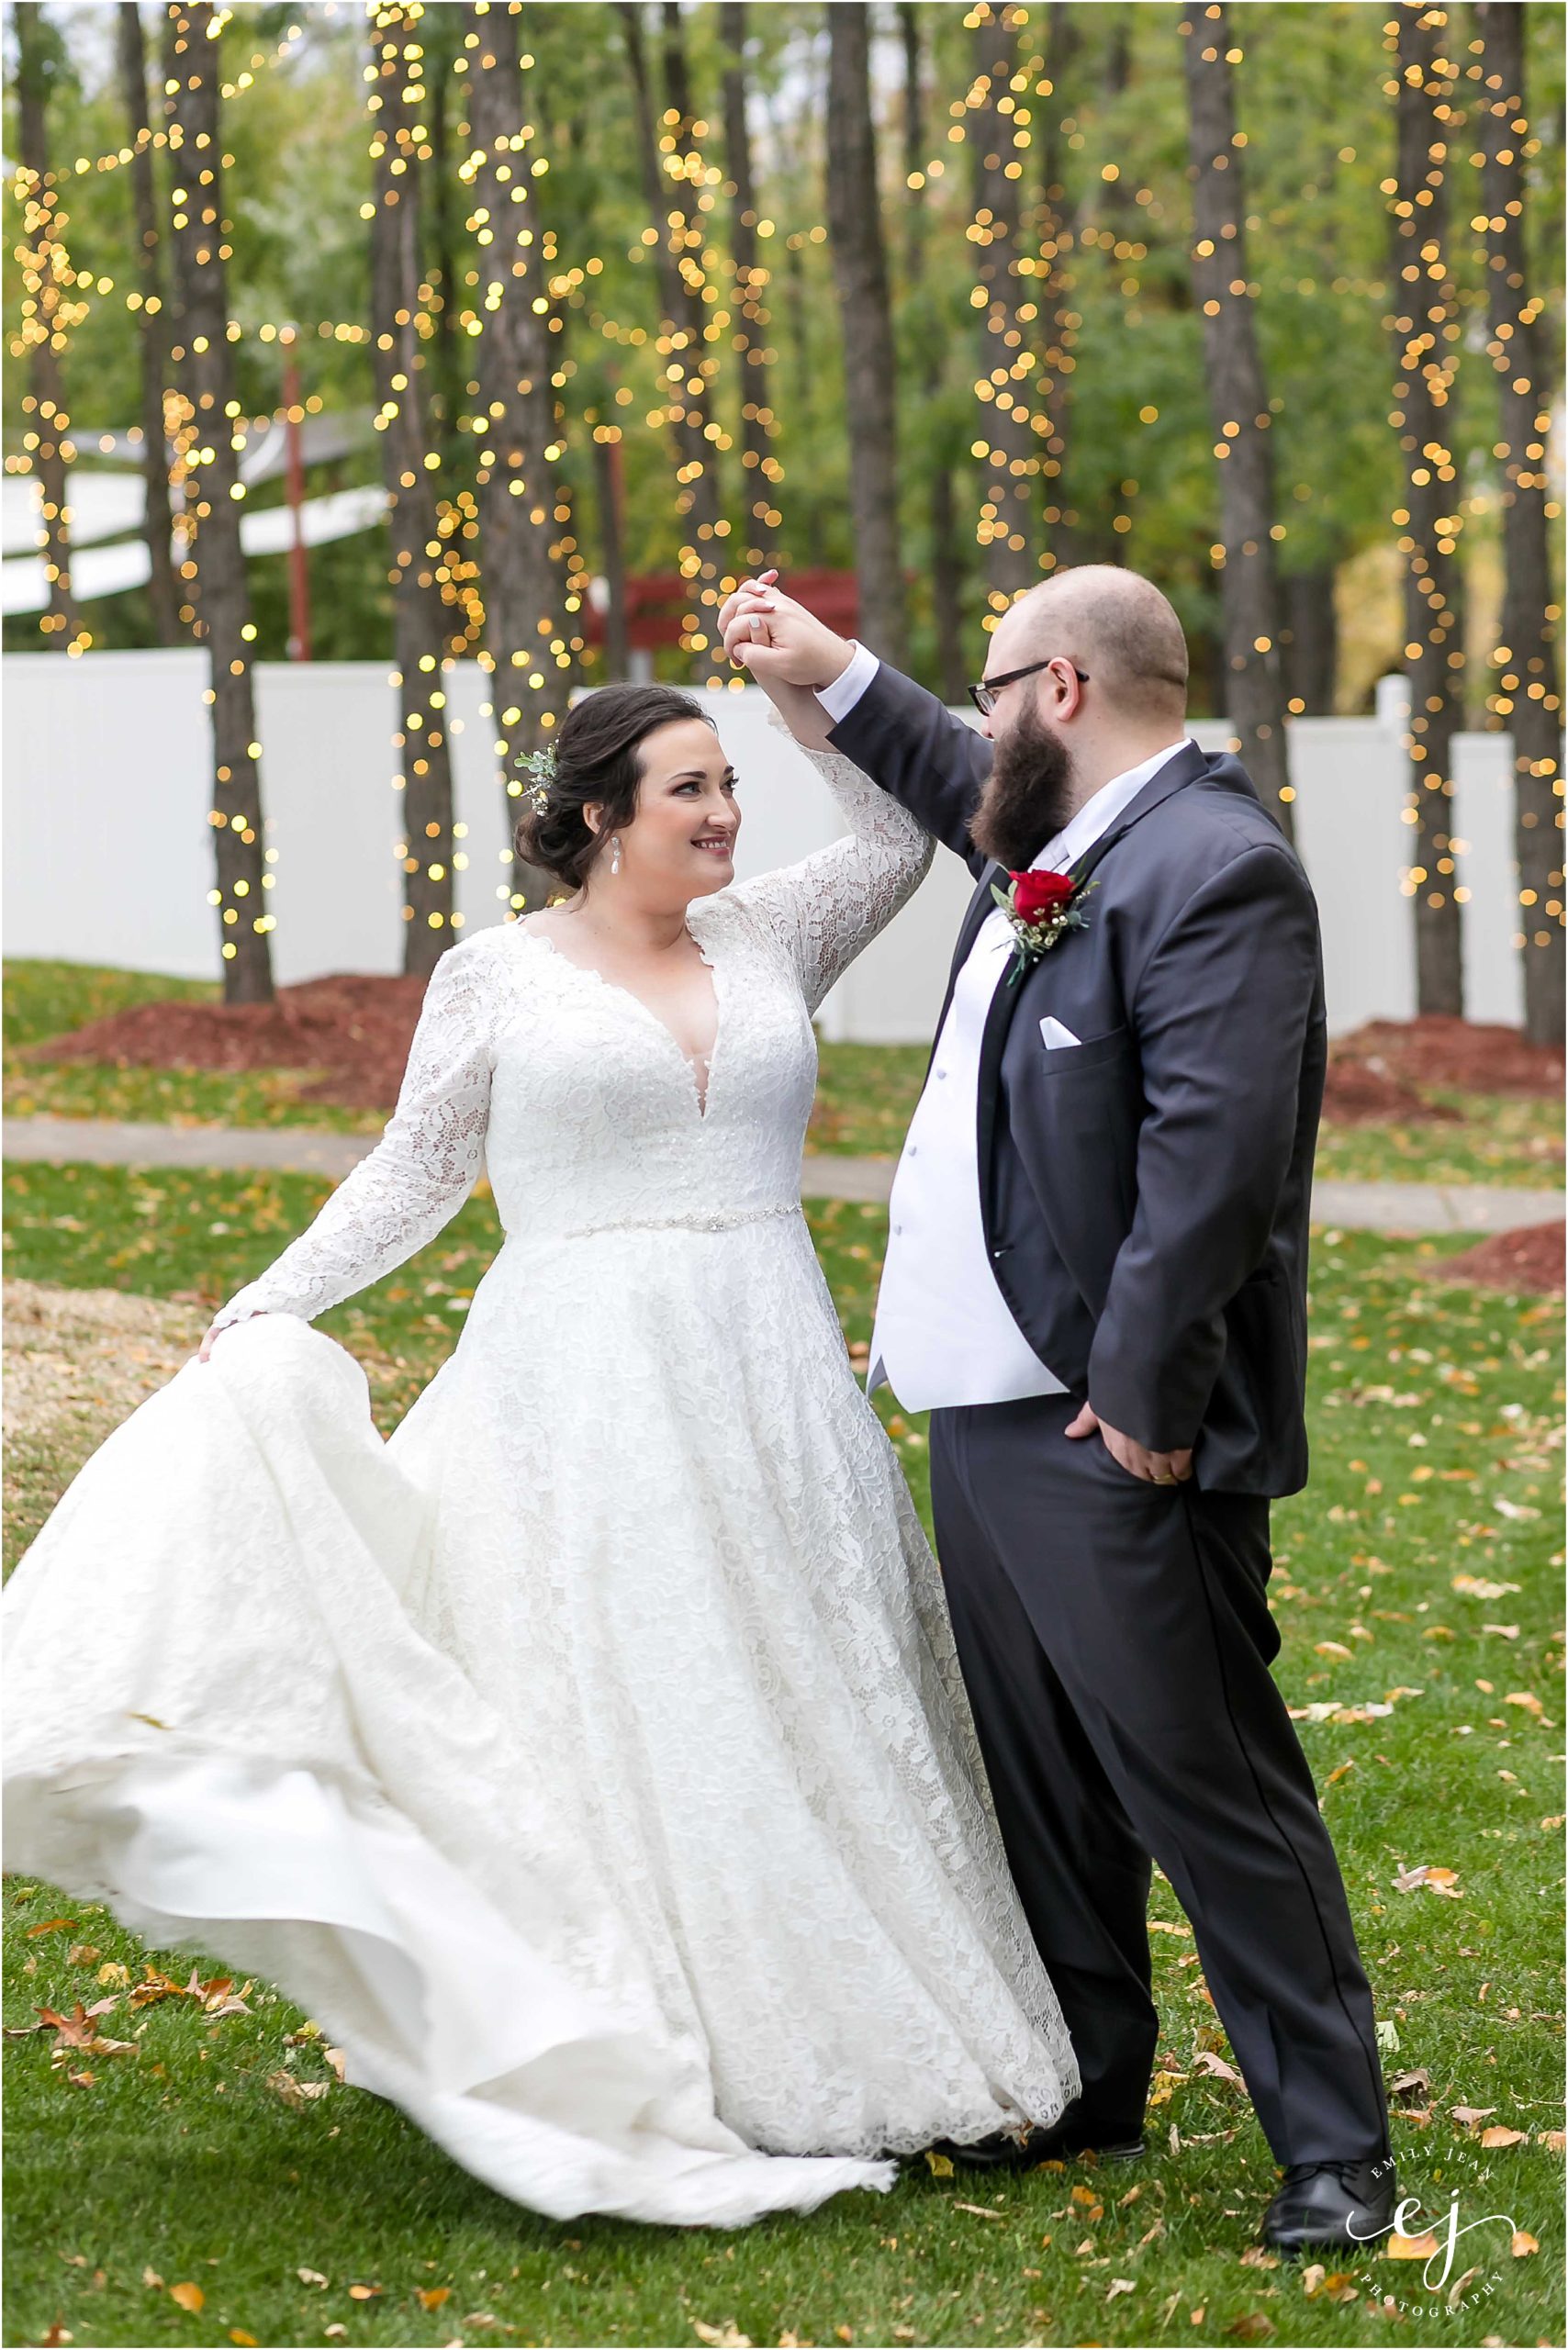 dancing in front of twinkle lights at celebrations wedding venue